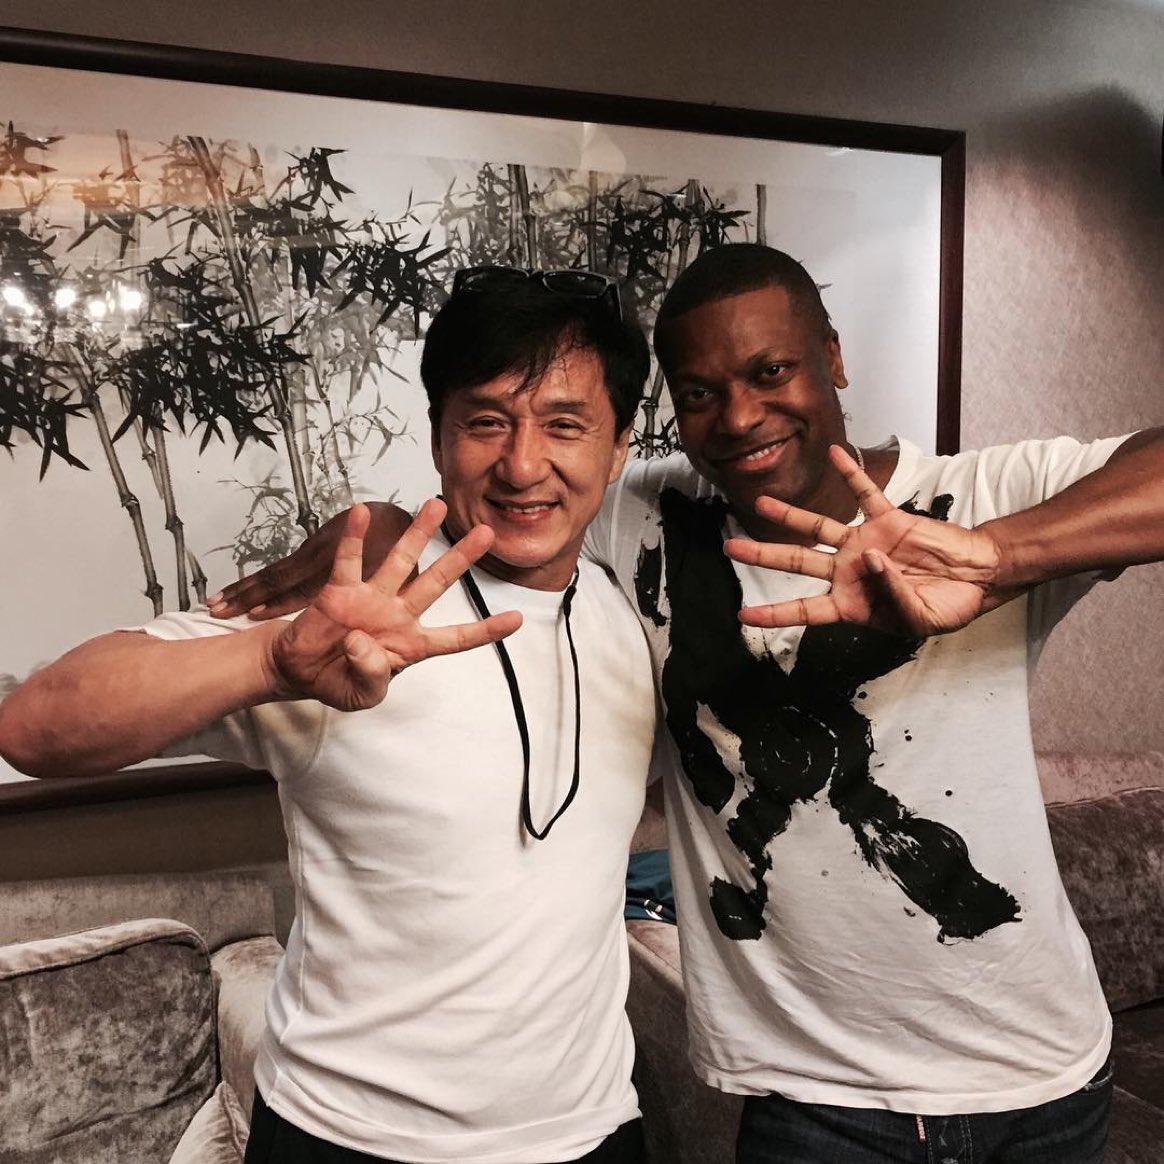 Jackie Chan has confirmed that #RushHour 4 is in the works.